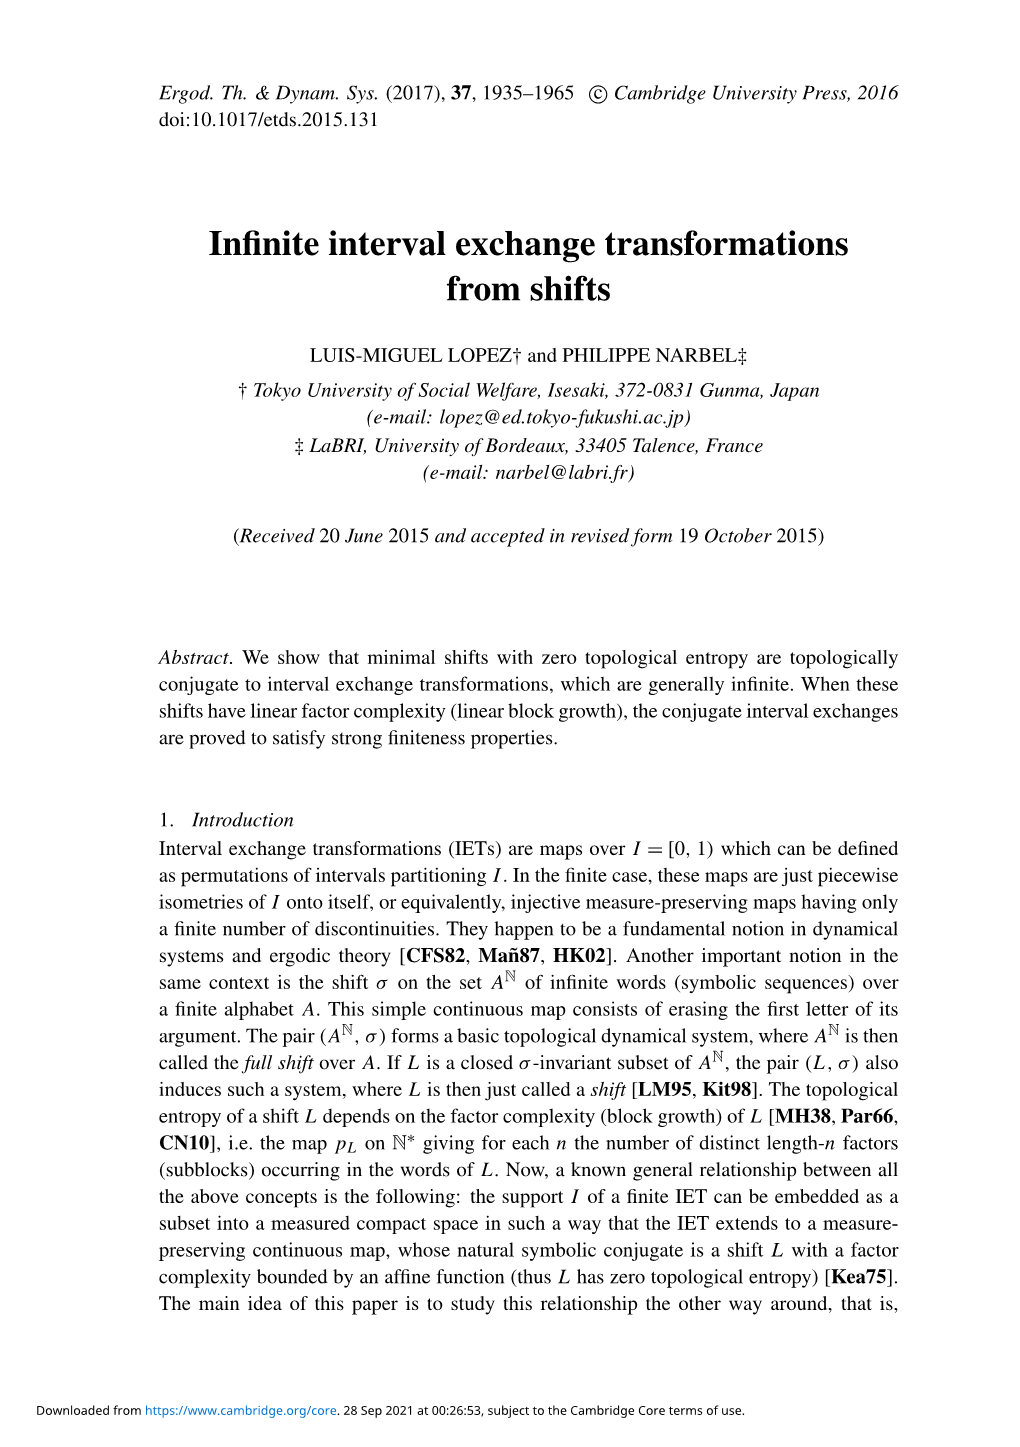 Infinite Interval Exchange Transformations from Shifts